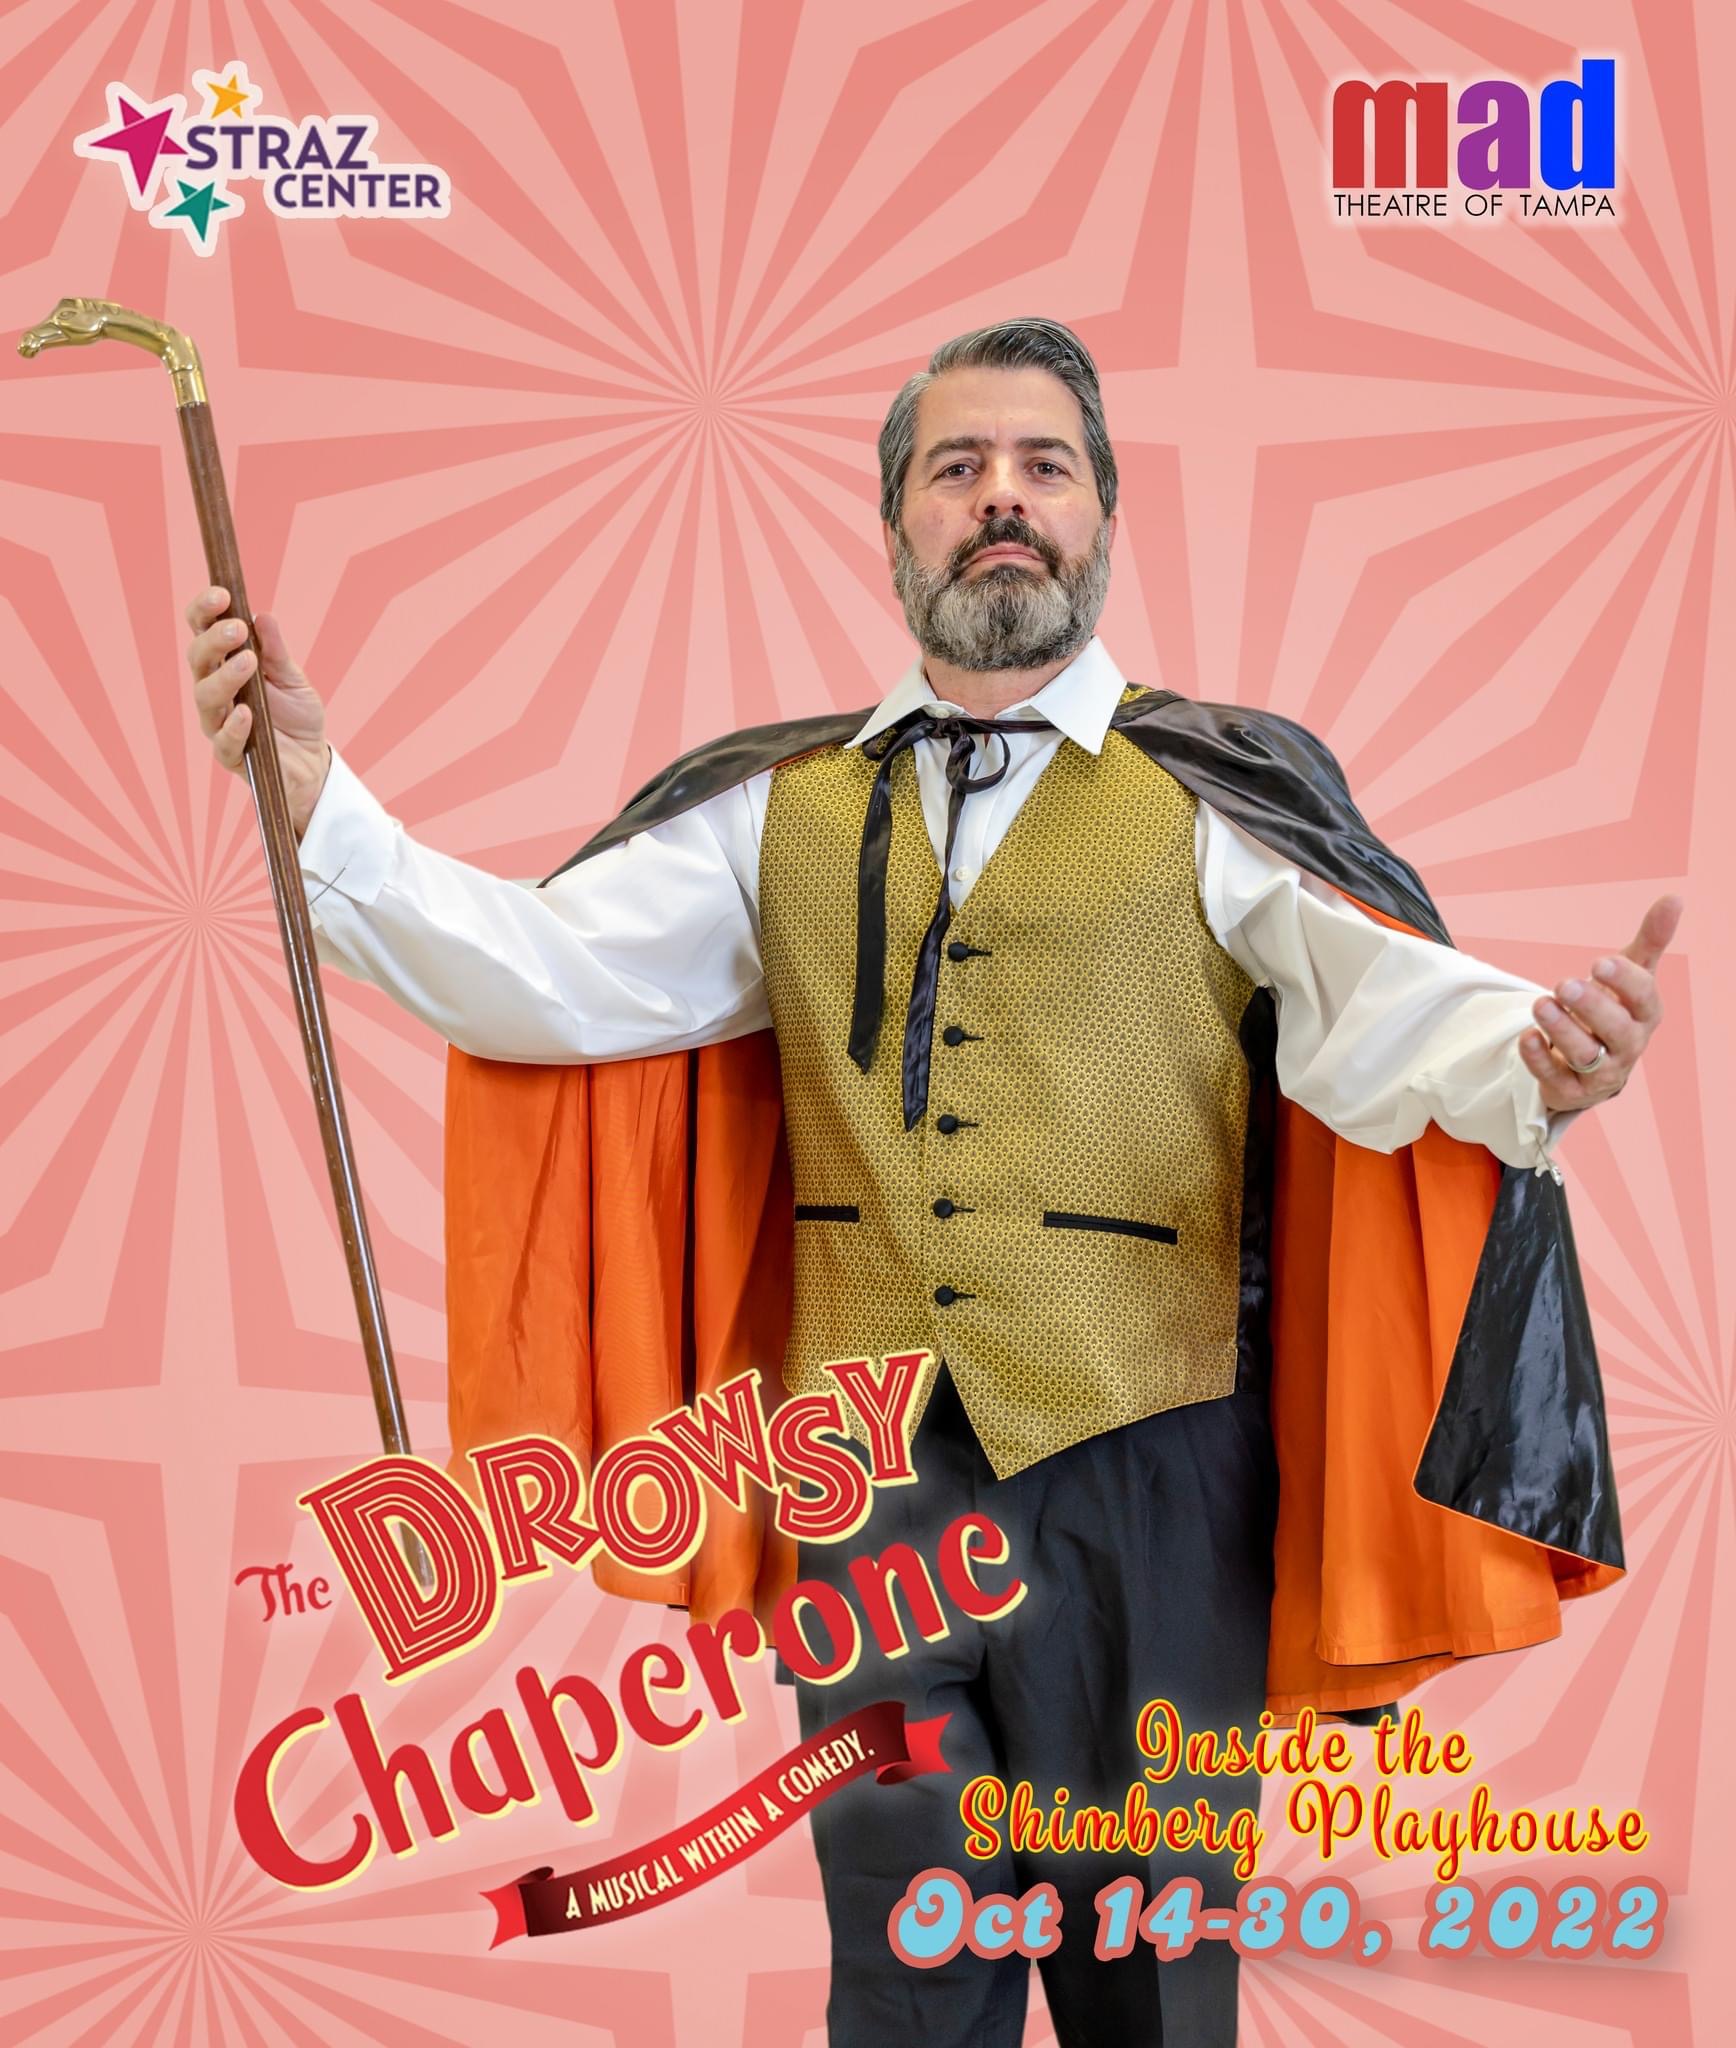 Meet Adolpho as played by Robert Pelaia in mad Theatre of Tampa’s “The Drowsy Chaperone